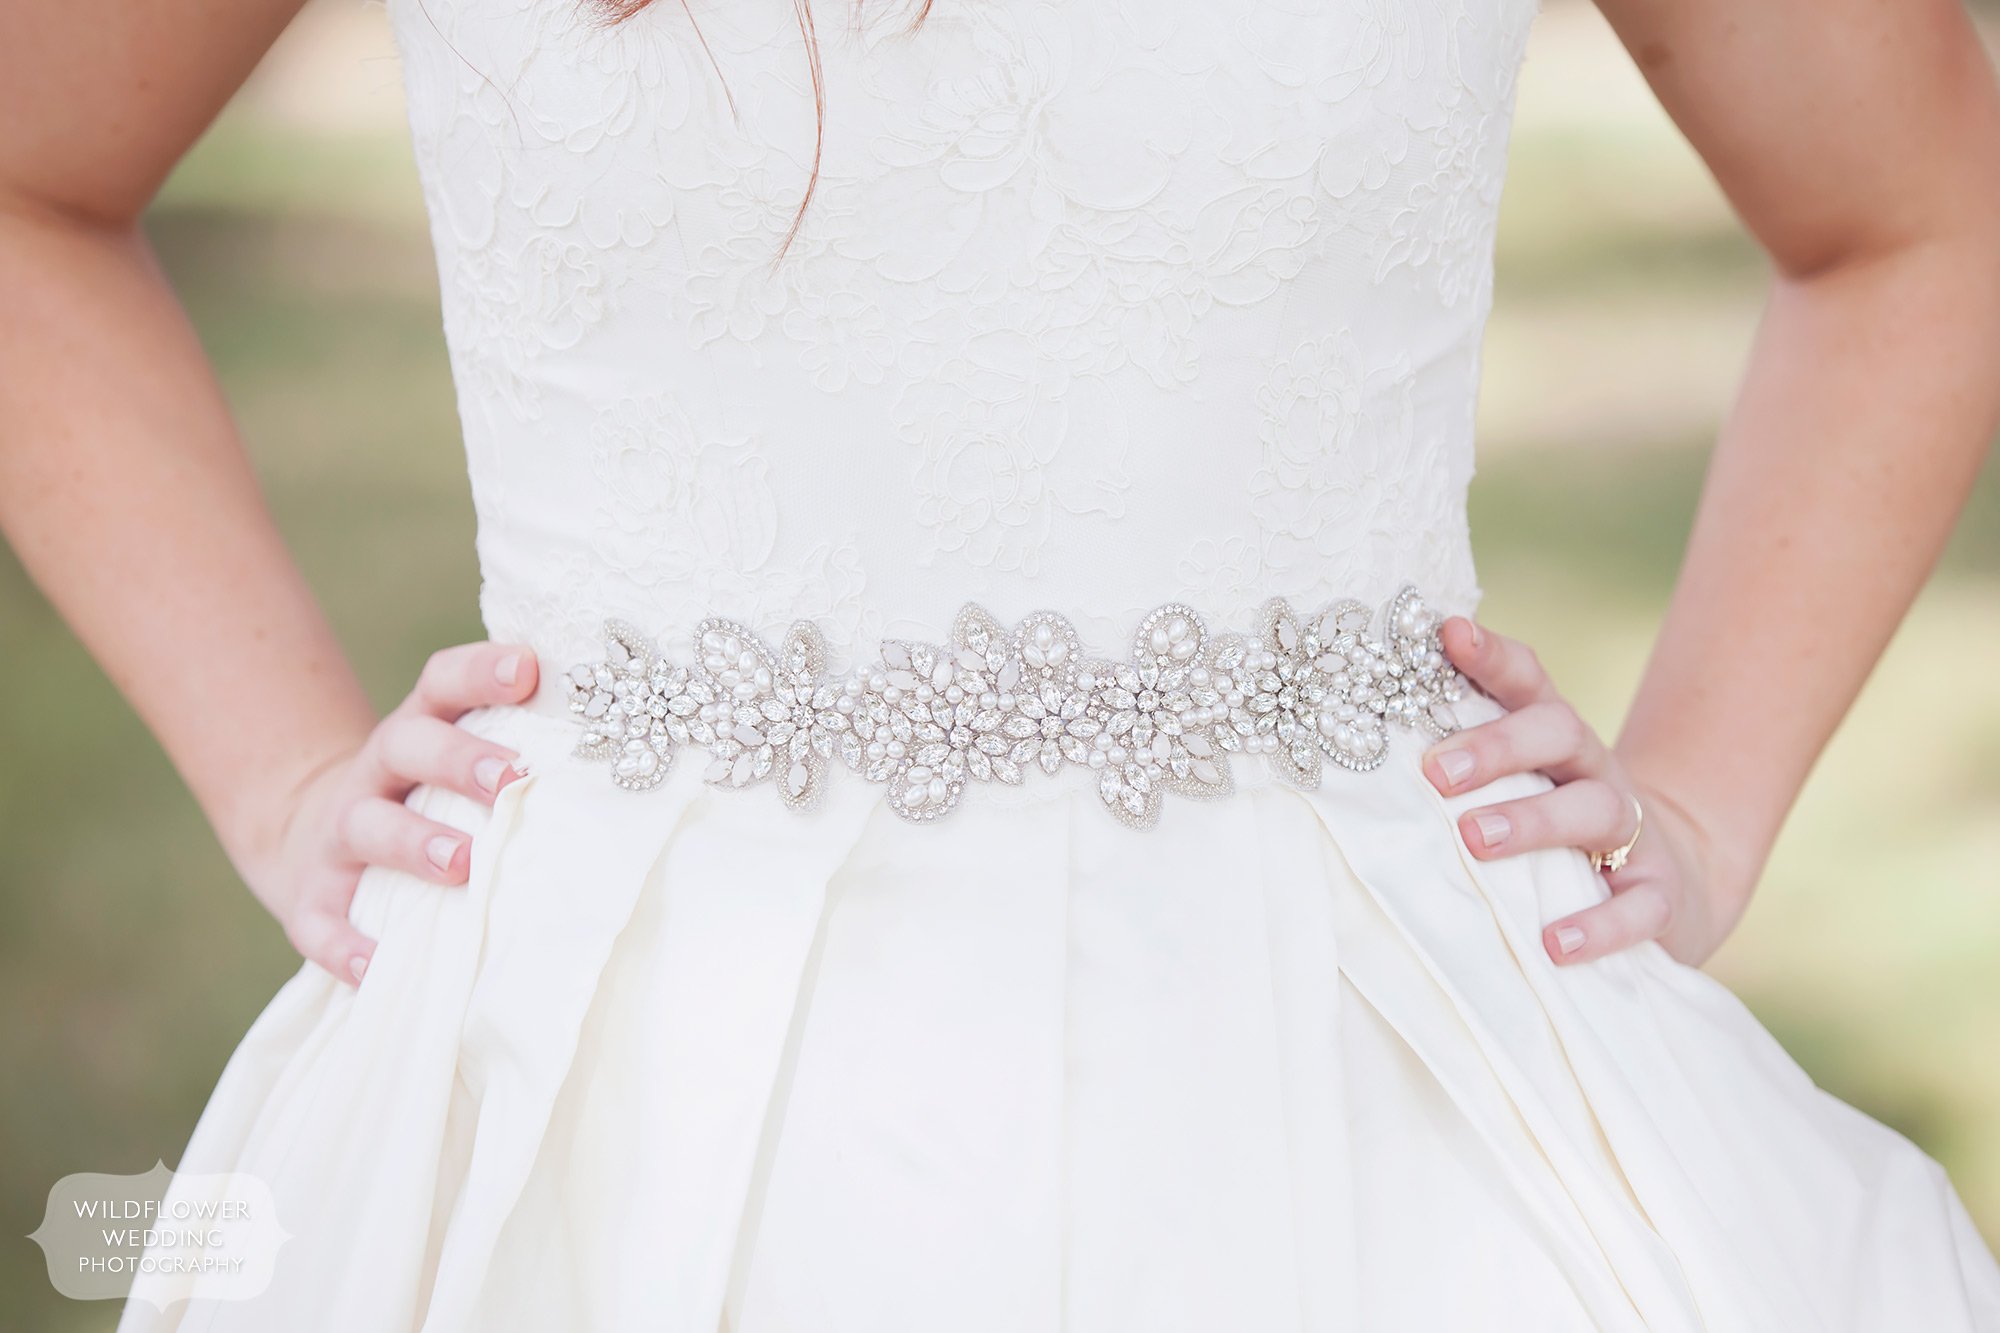 Love this alternative wedding photography image of the bride's sparkle belt with her dress in MO.